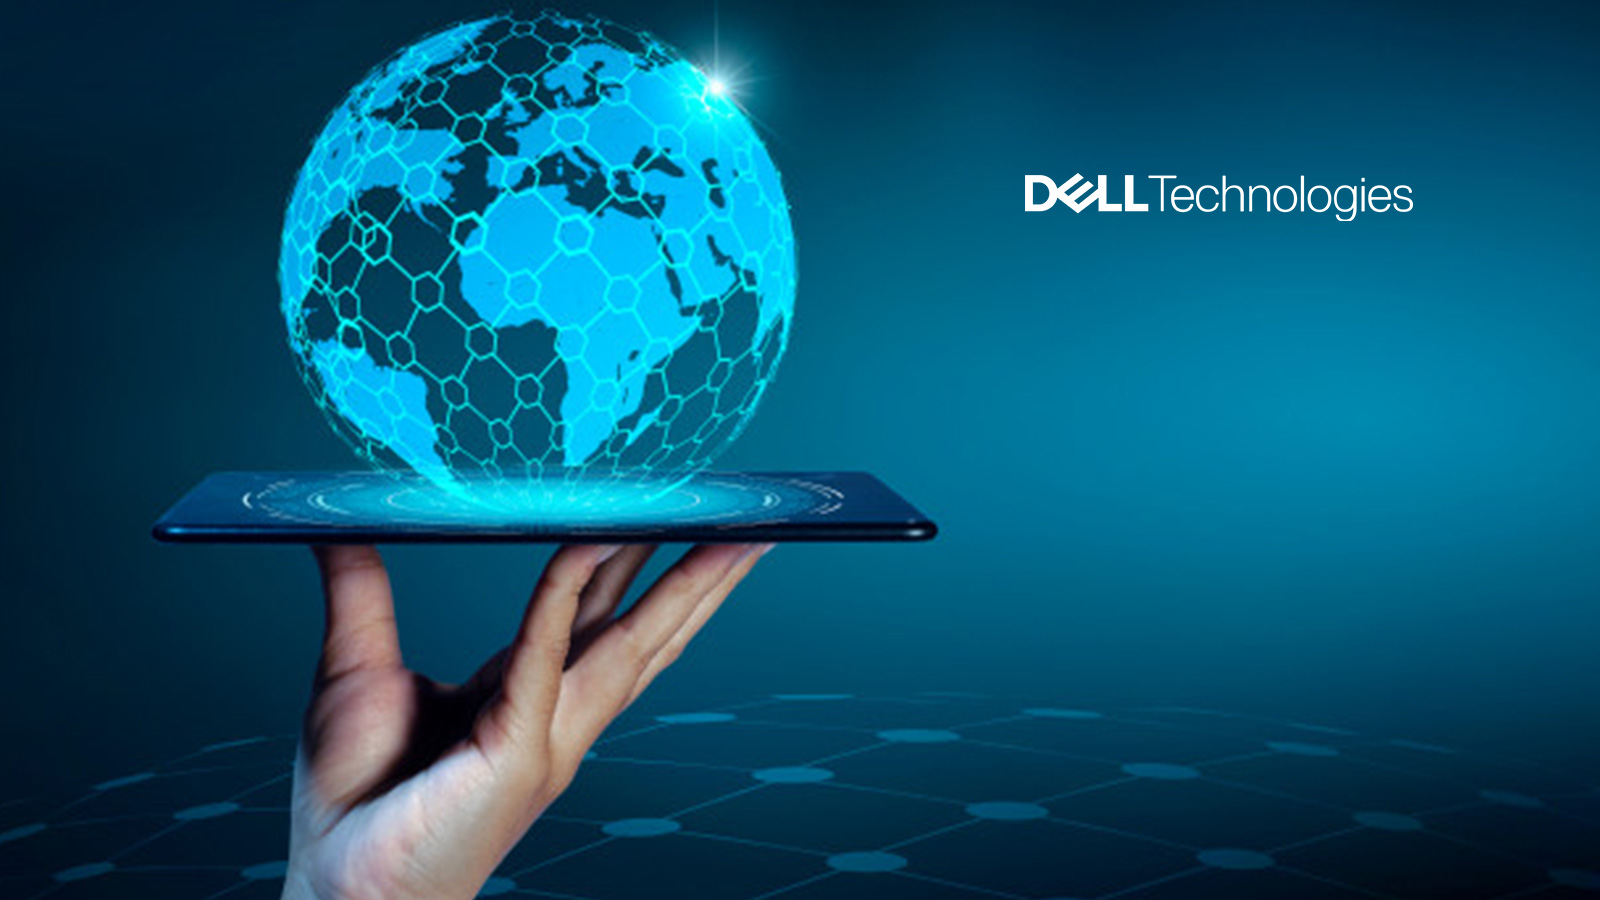 Dell-Technologies-Simplifies-Customers-Path-to-Innovation-with-AI-and-High-Performance-Computing1.jpg